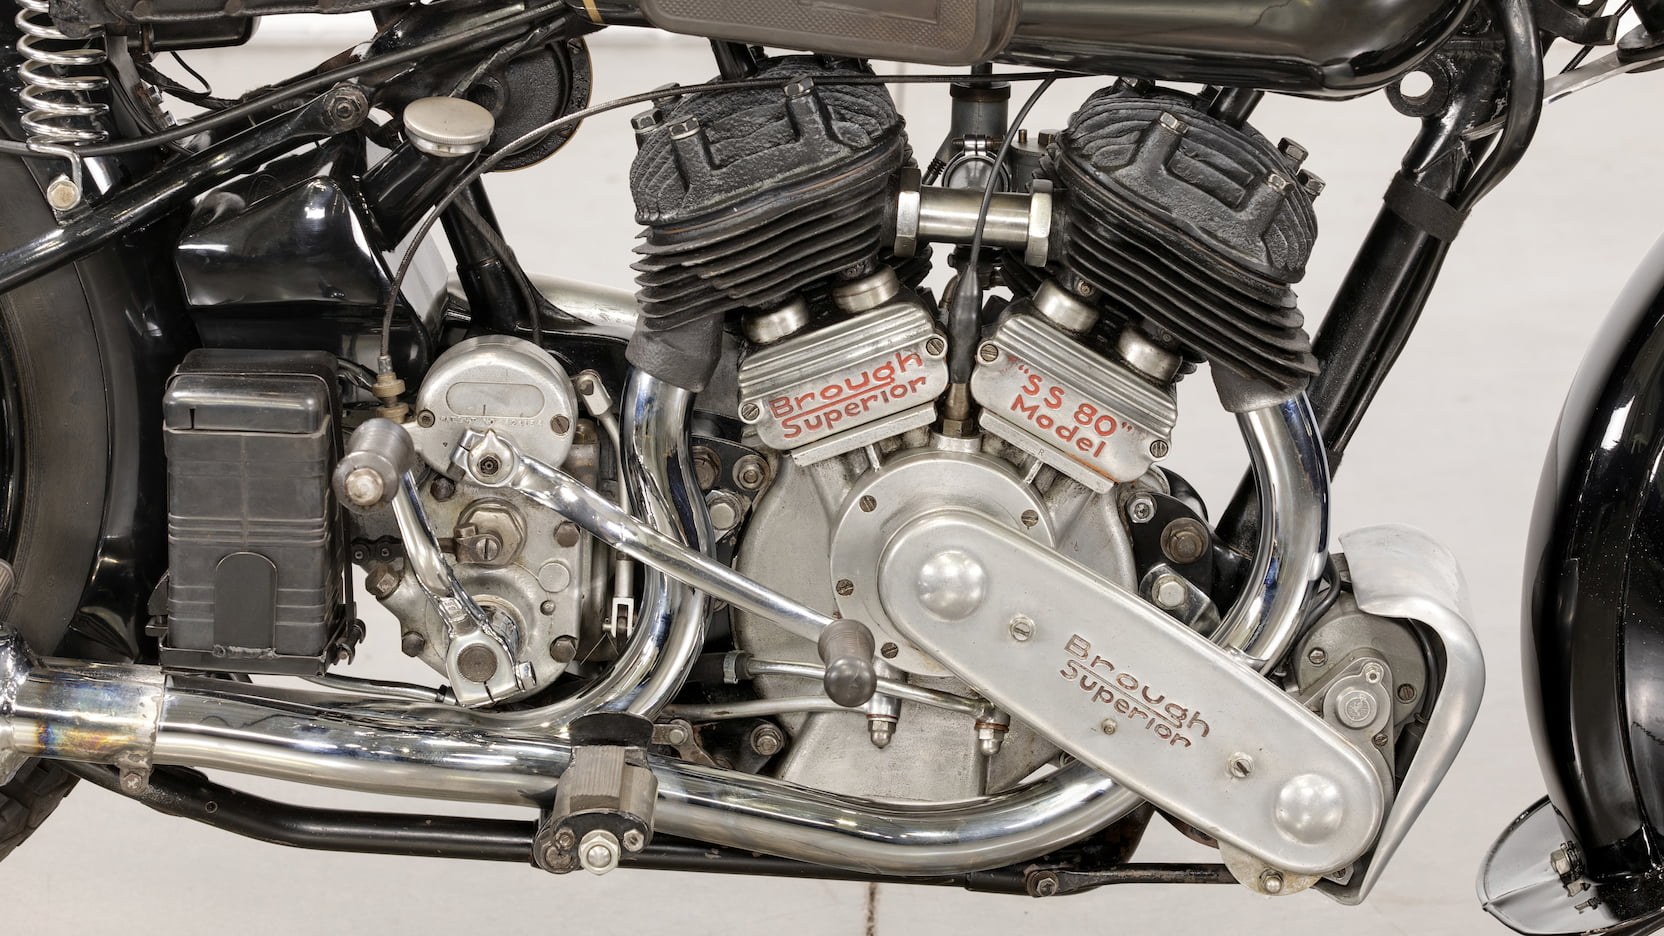 Brough Superior SS80 Matchless engine